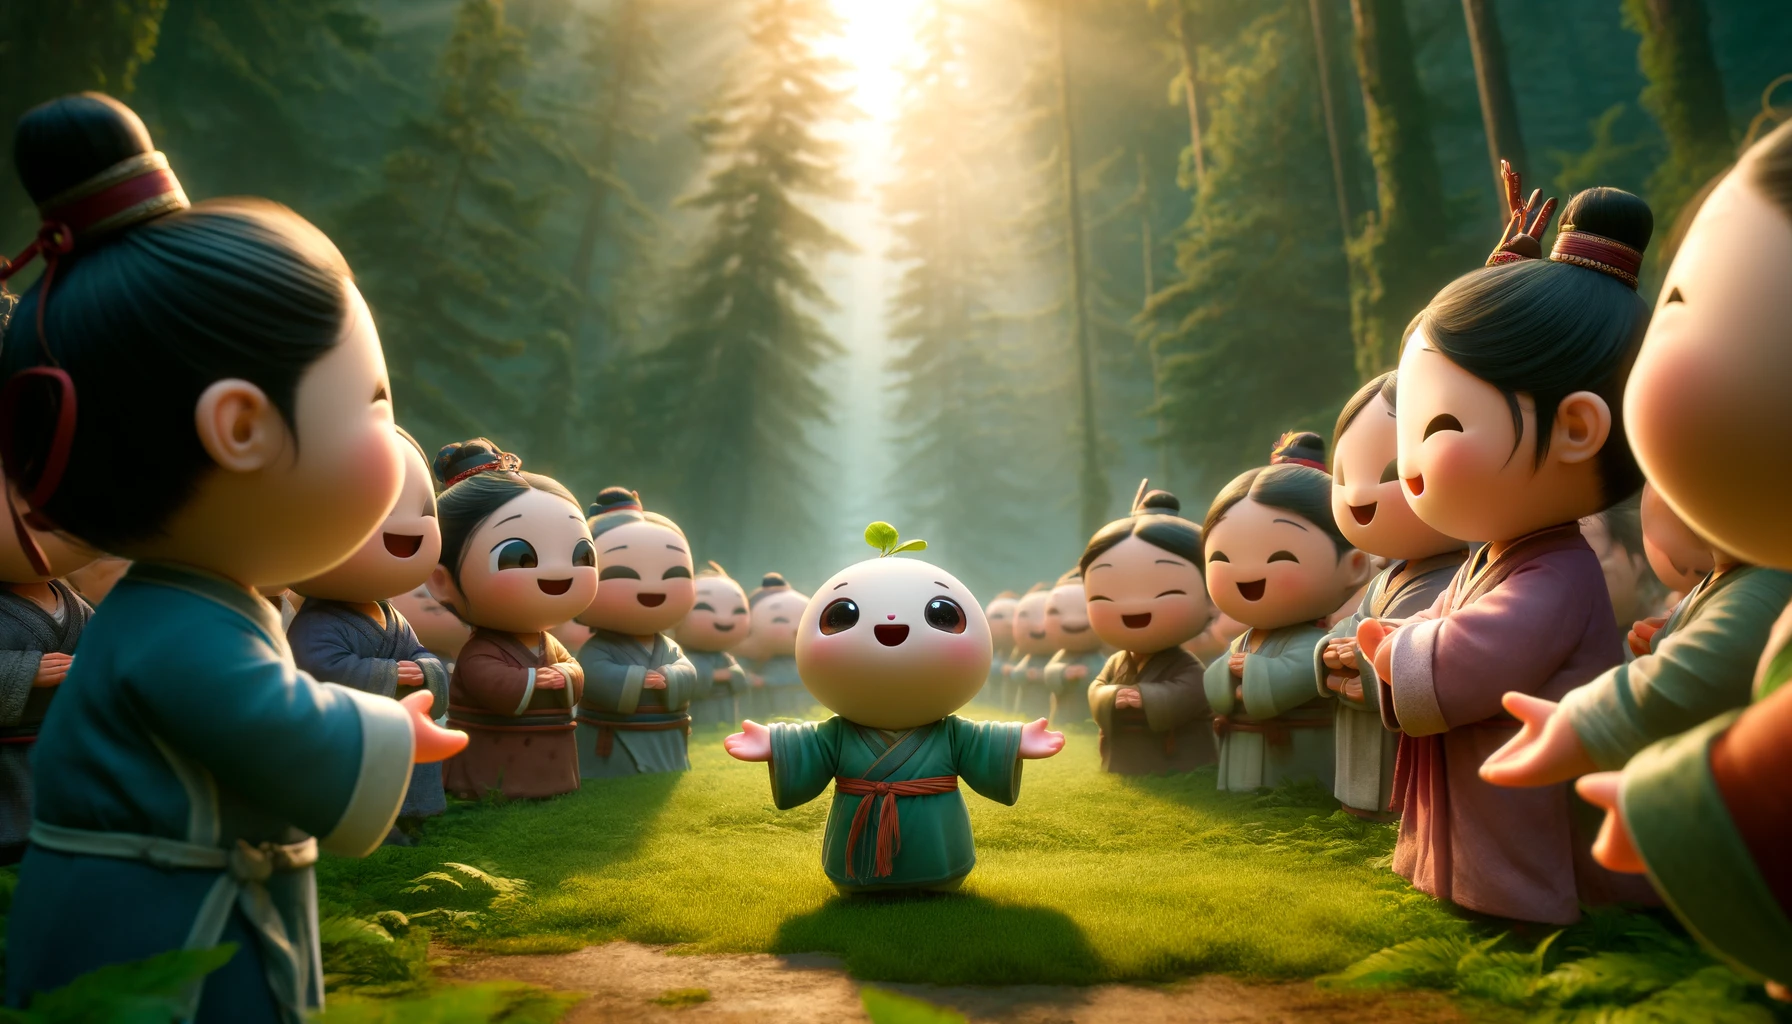 A heartwarming scene of a cute baby Jiangshi finally finding its family. The baby Jiangshi, with a look of happiness and relief, is surrounded by other Jiangshis of various sizes, representing its family members, all dressed in traditional Chinese attire. The family is gathered in a lush, green forest clearing under a setting sun, which casts a golden light over the scene. The other Jiangshis show expressions of joy and welcome, with open arms and warm smiles. This wide image captures the emotional reunion and the beauty of the forest environment.